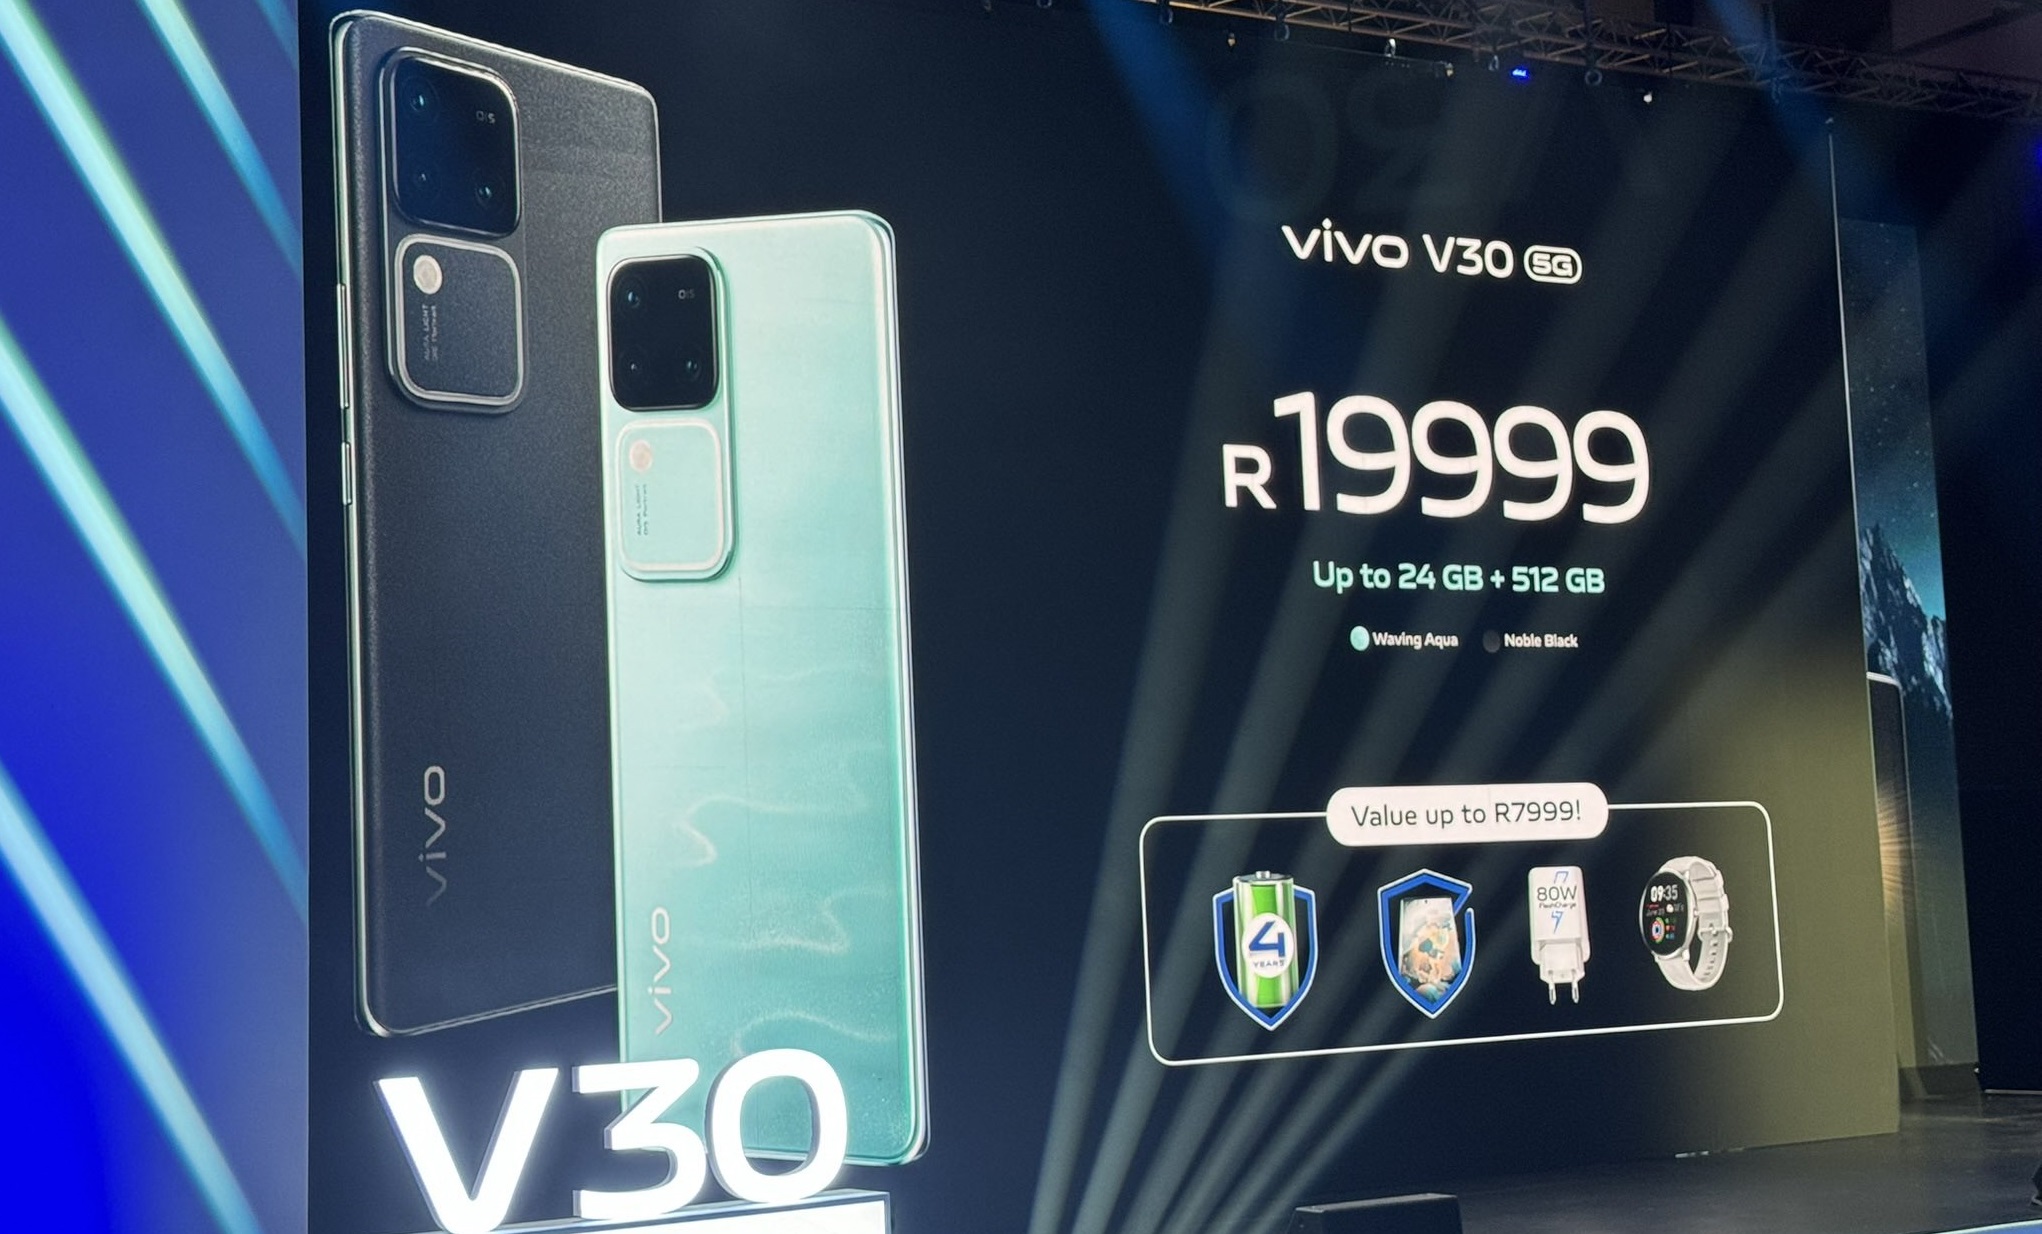 When you buy the vivo V30 5G, you get R7999 worth of bonuses [Video]